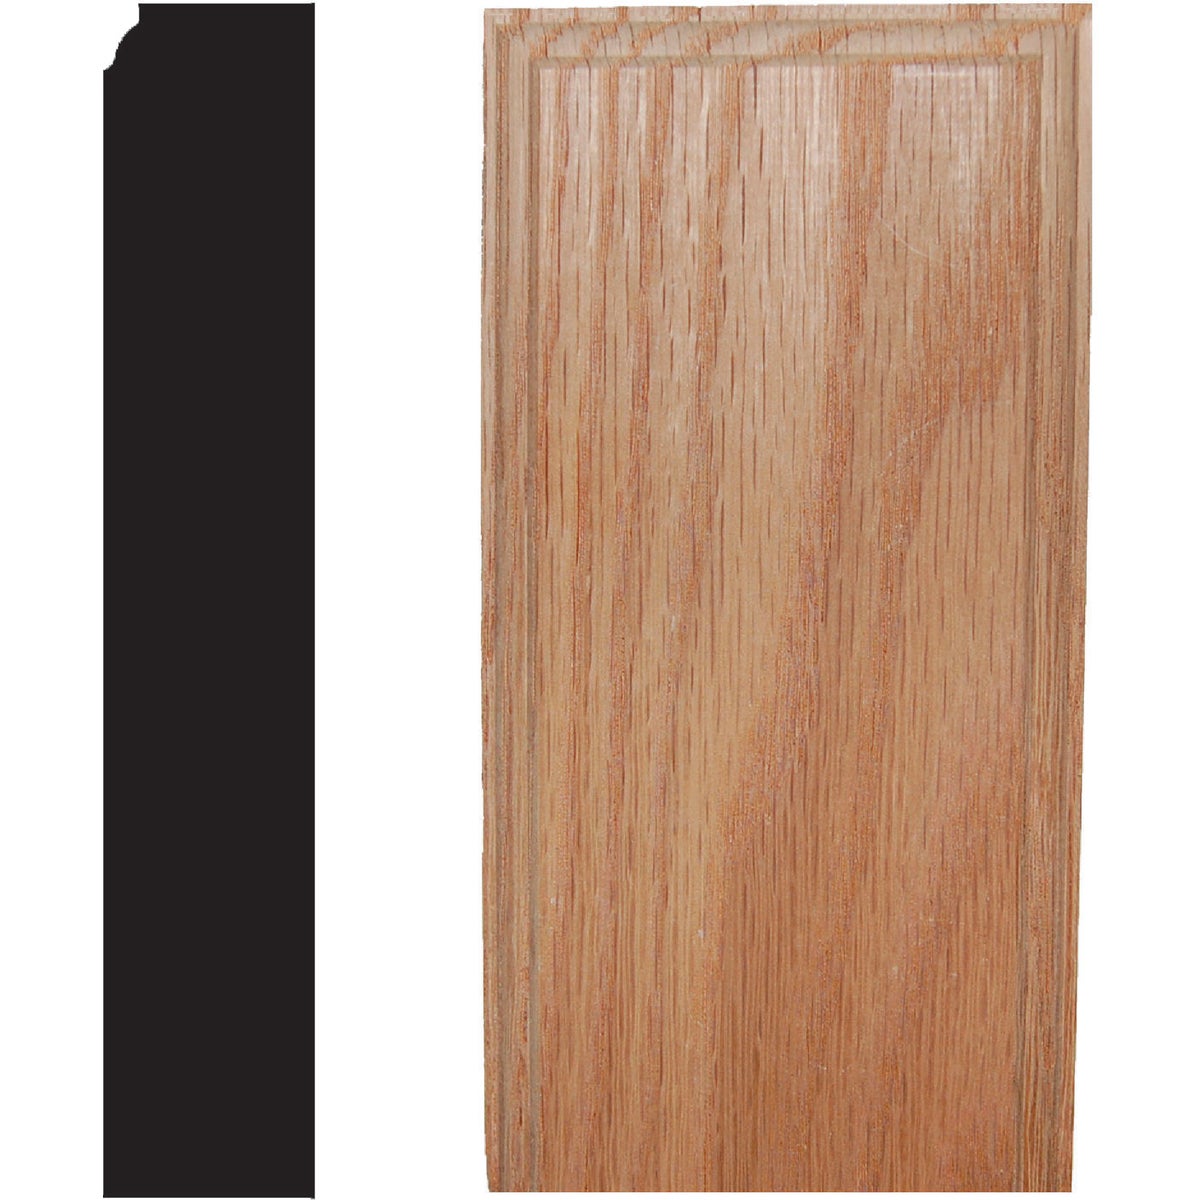 Item 190217, Designed for use with all standard wood moldings presently stocked by all 